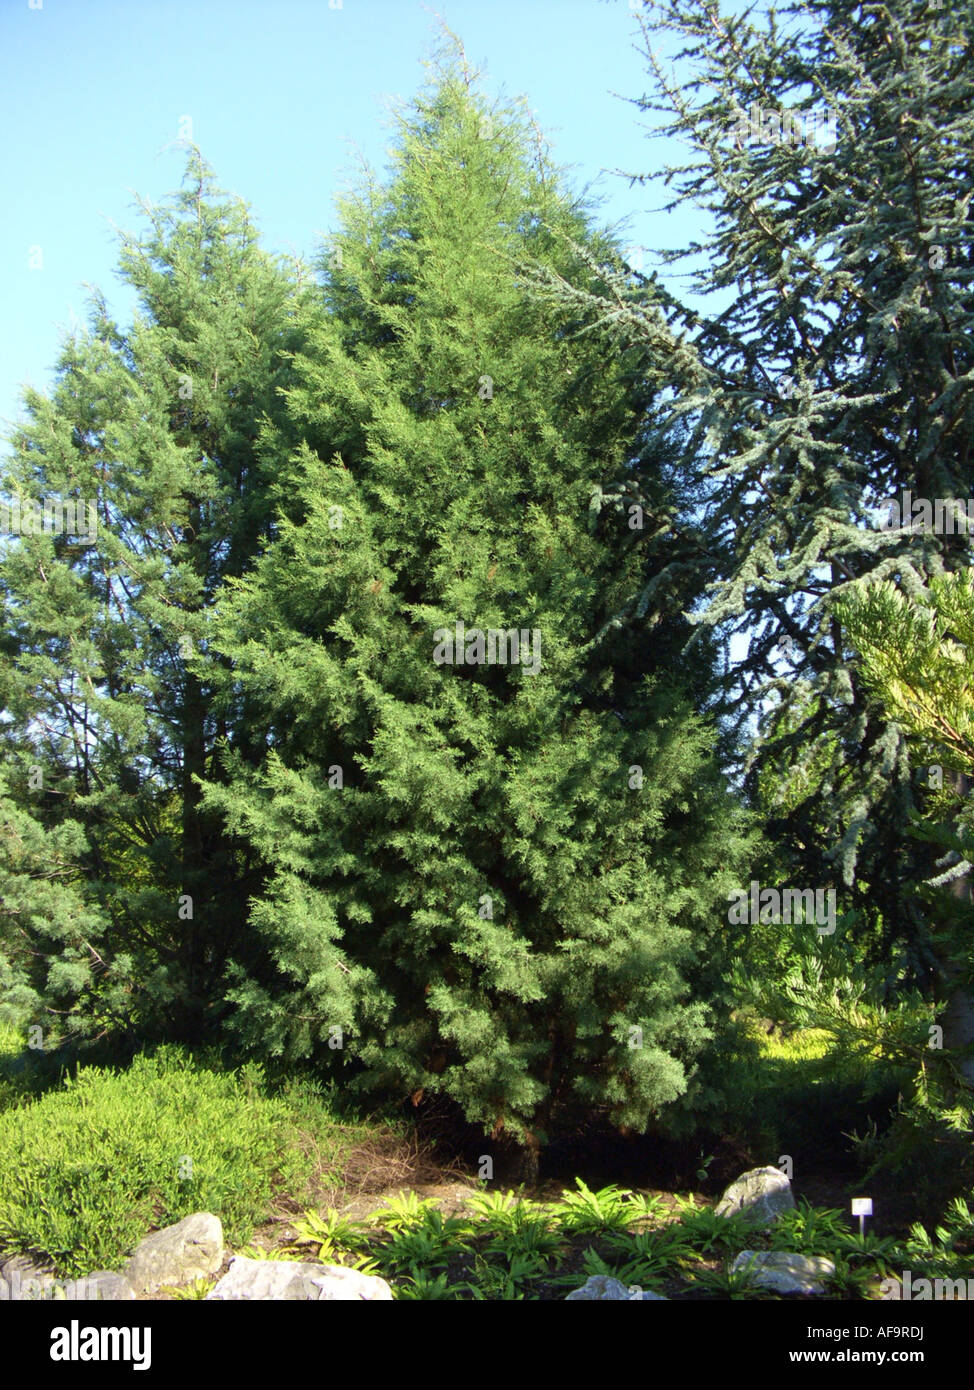 Modoc Cypress, Siskiyou Cypress, Baker Cypress (Cupressus bakeri), two individuals in a park Stock Photo